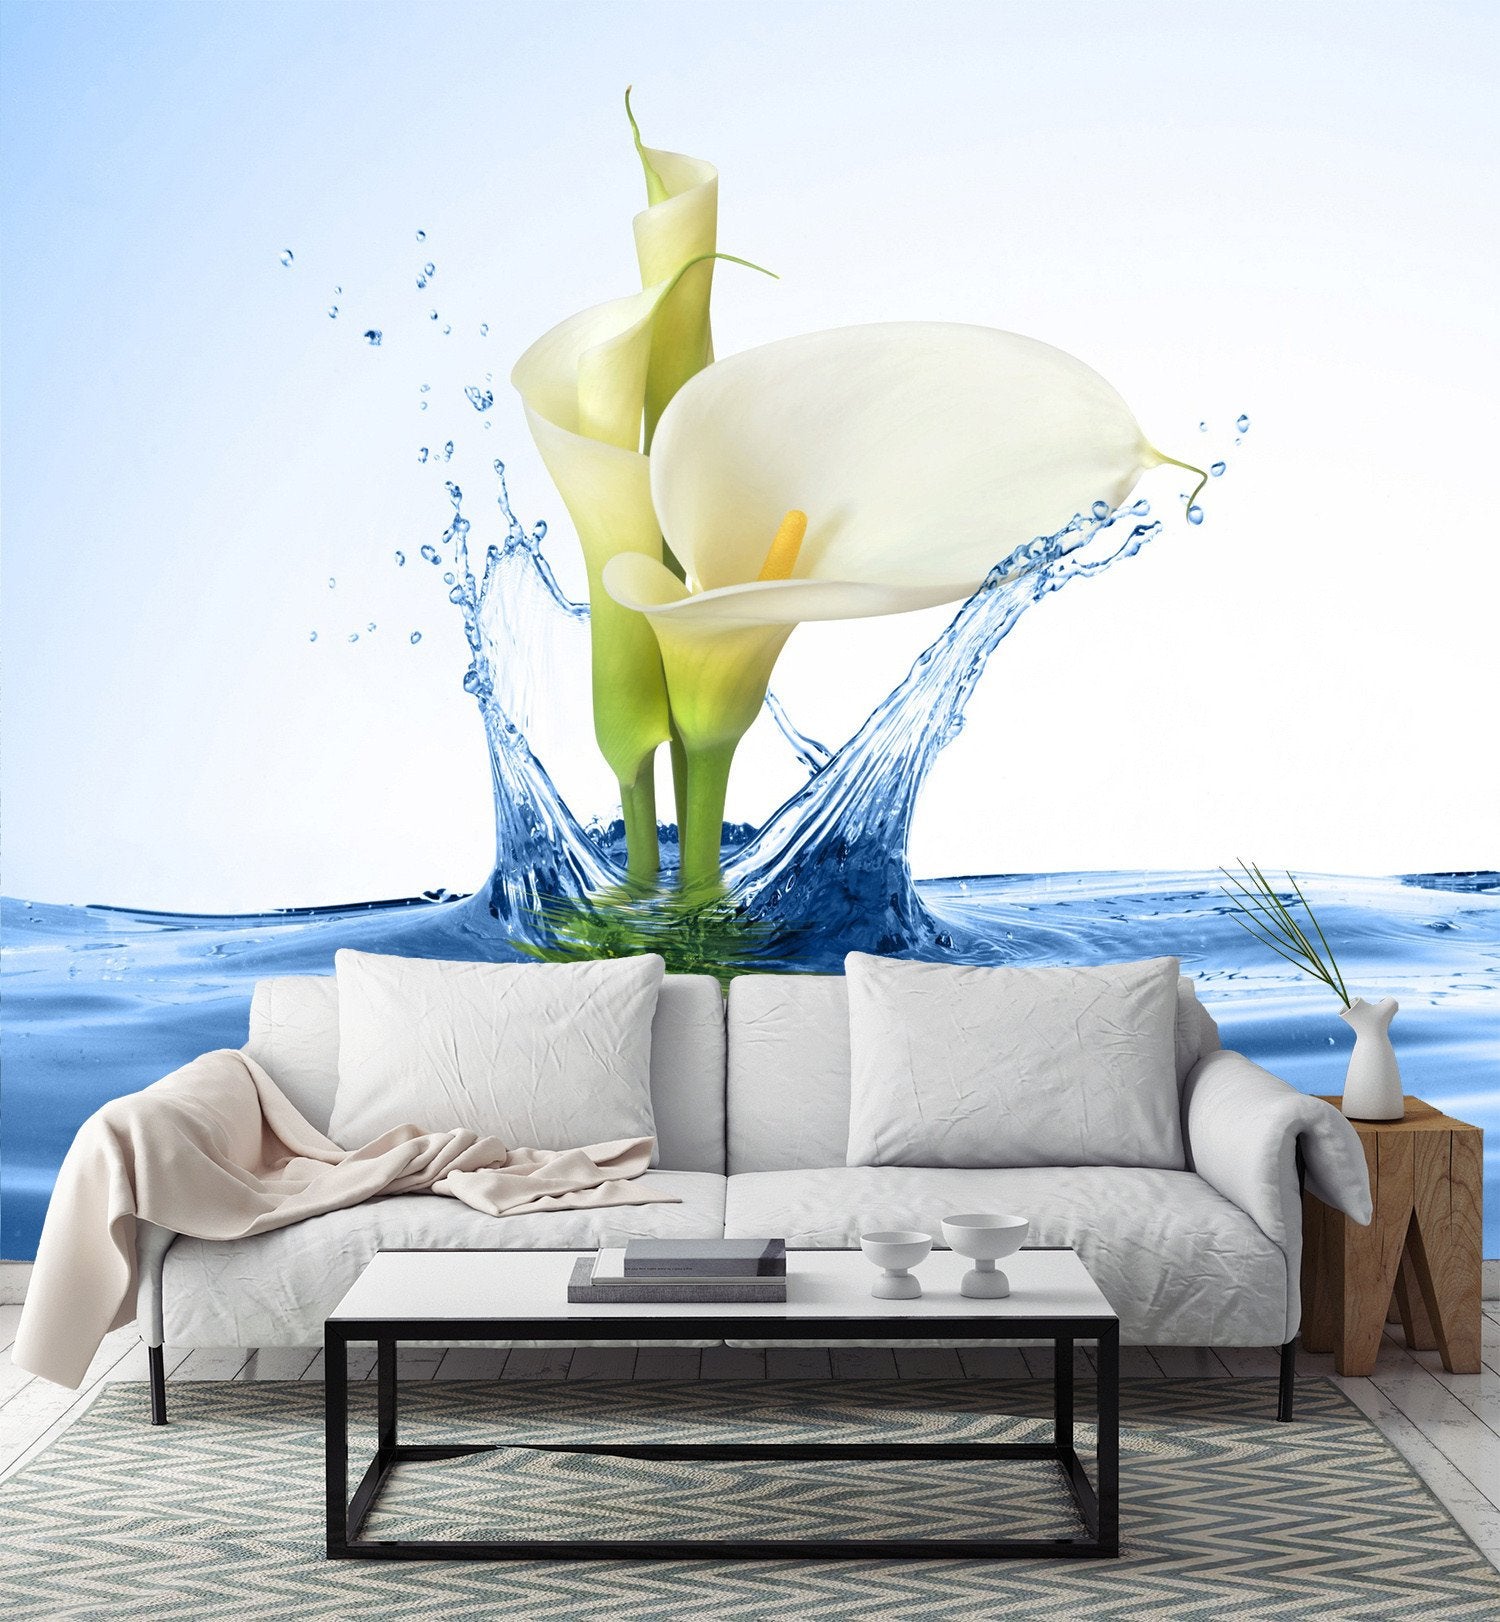 3D White Lily Blossoming On Water 6 Wallpaper AJ Wallpaper 